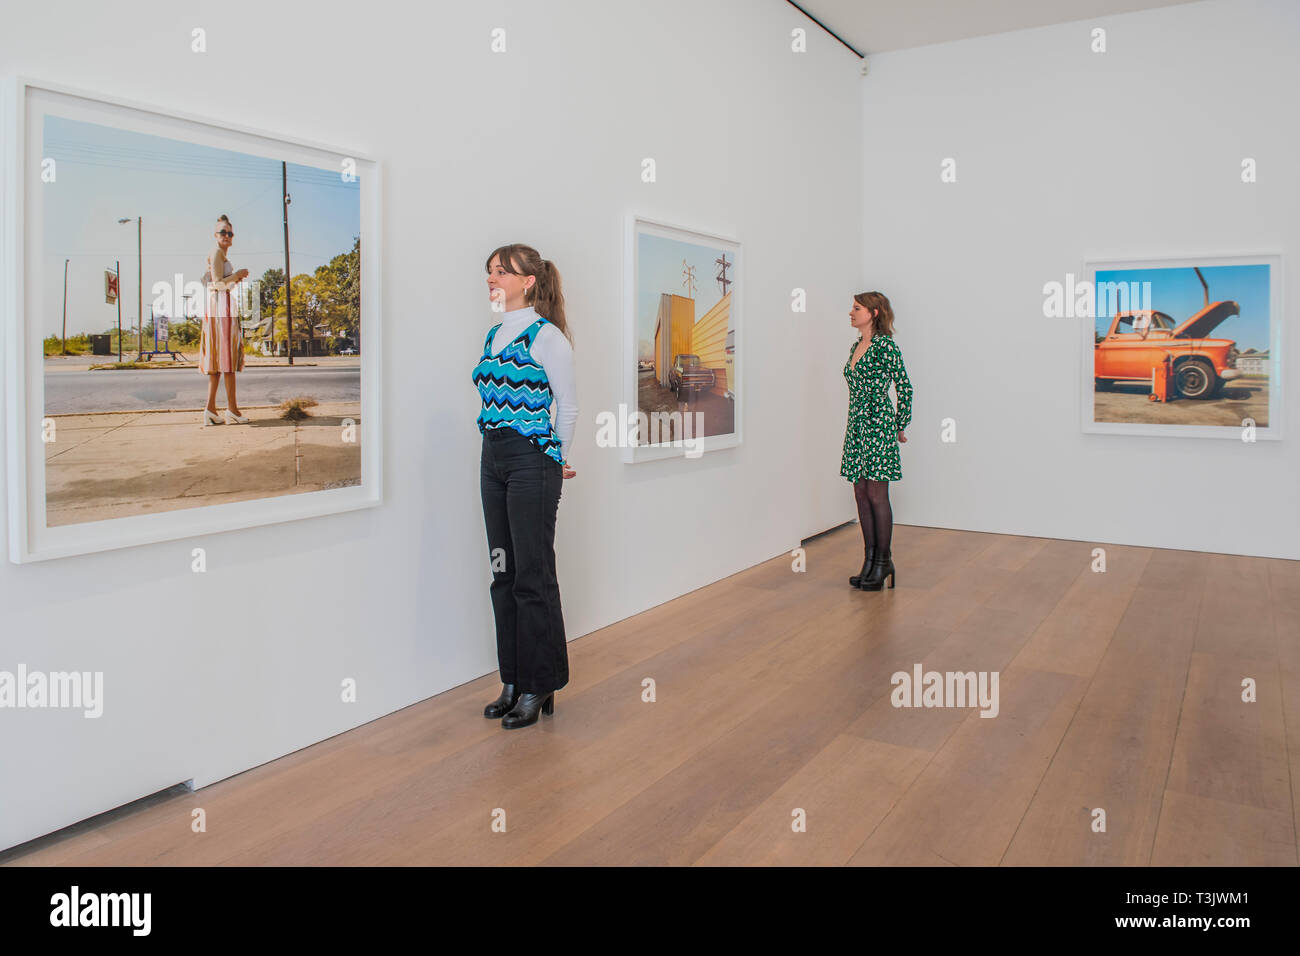 London, UK. 10th Apr, 2019. William Eggleston's new exhibition 2¼ opens at the David Zwirner gallery. The exhibition is made up of a selection of works from his 2¼ series, which have never been exhibited before. William chose the selection himself. This will be his first show with the London gallery. Credit: Guy Bell/Alamy Live News Stock Photo